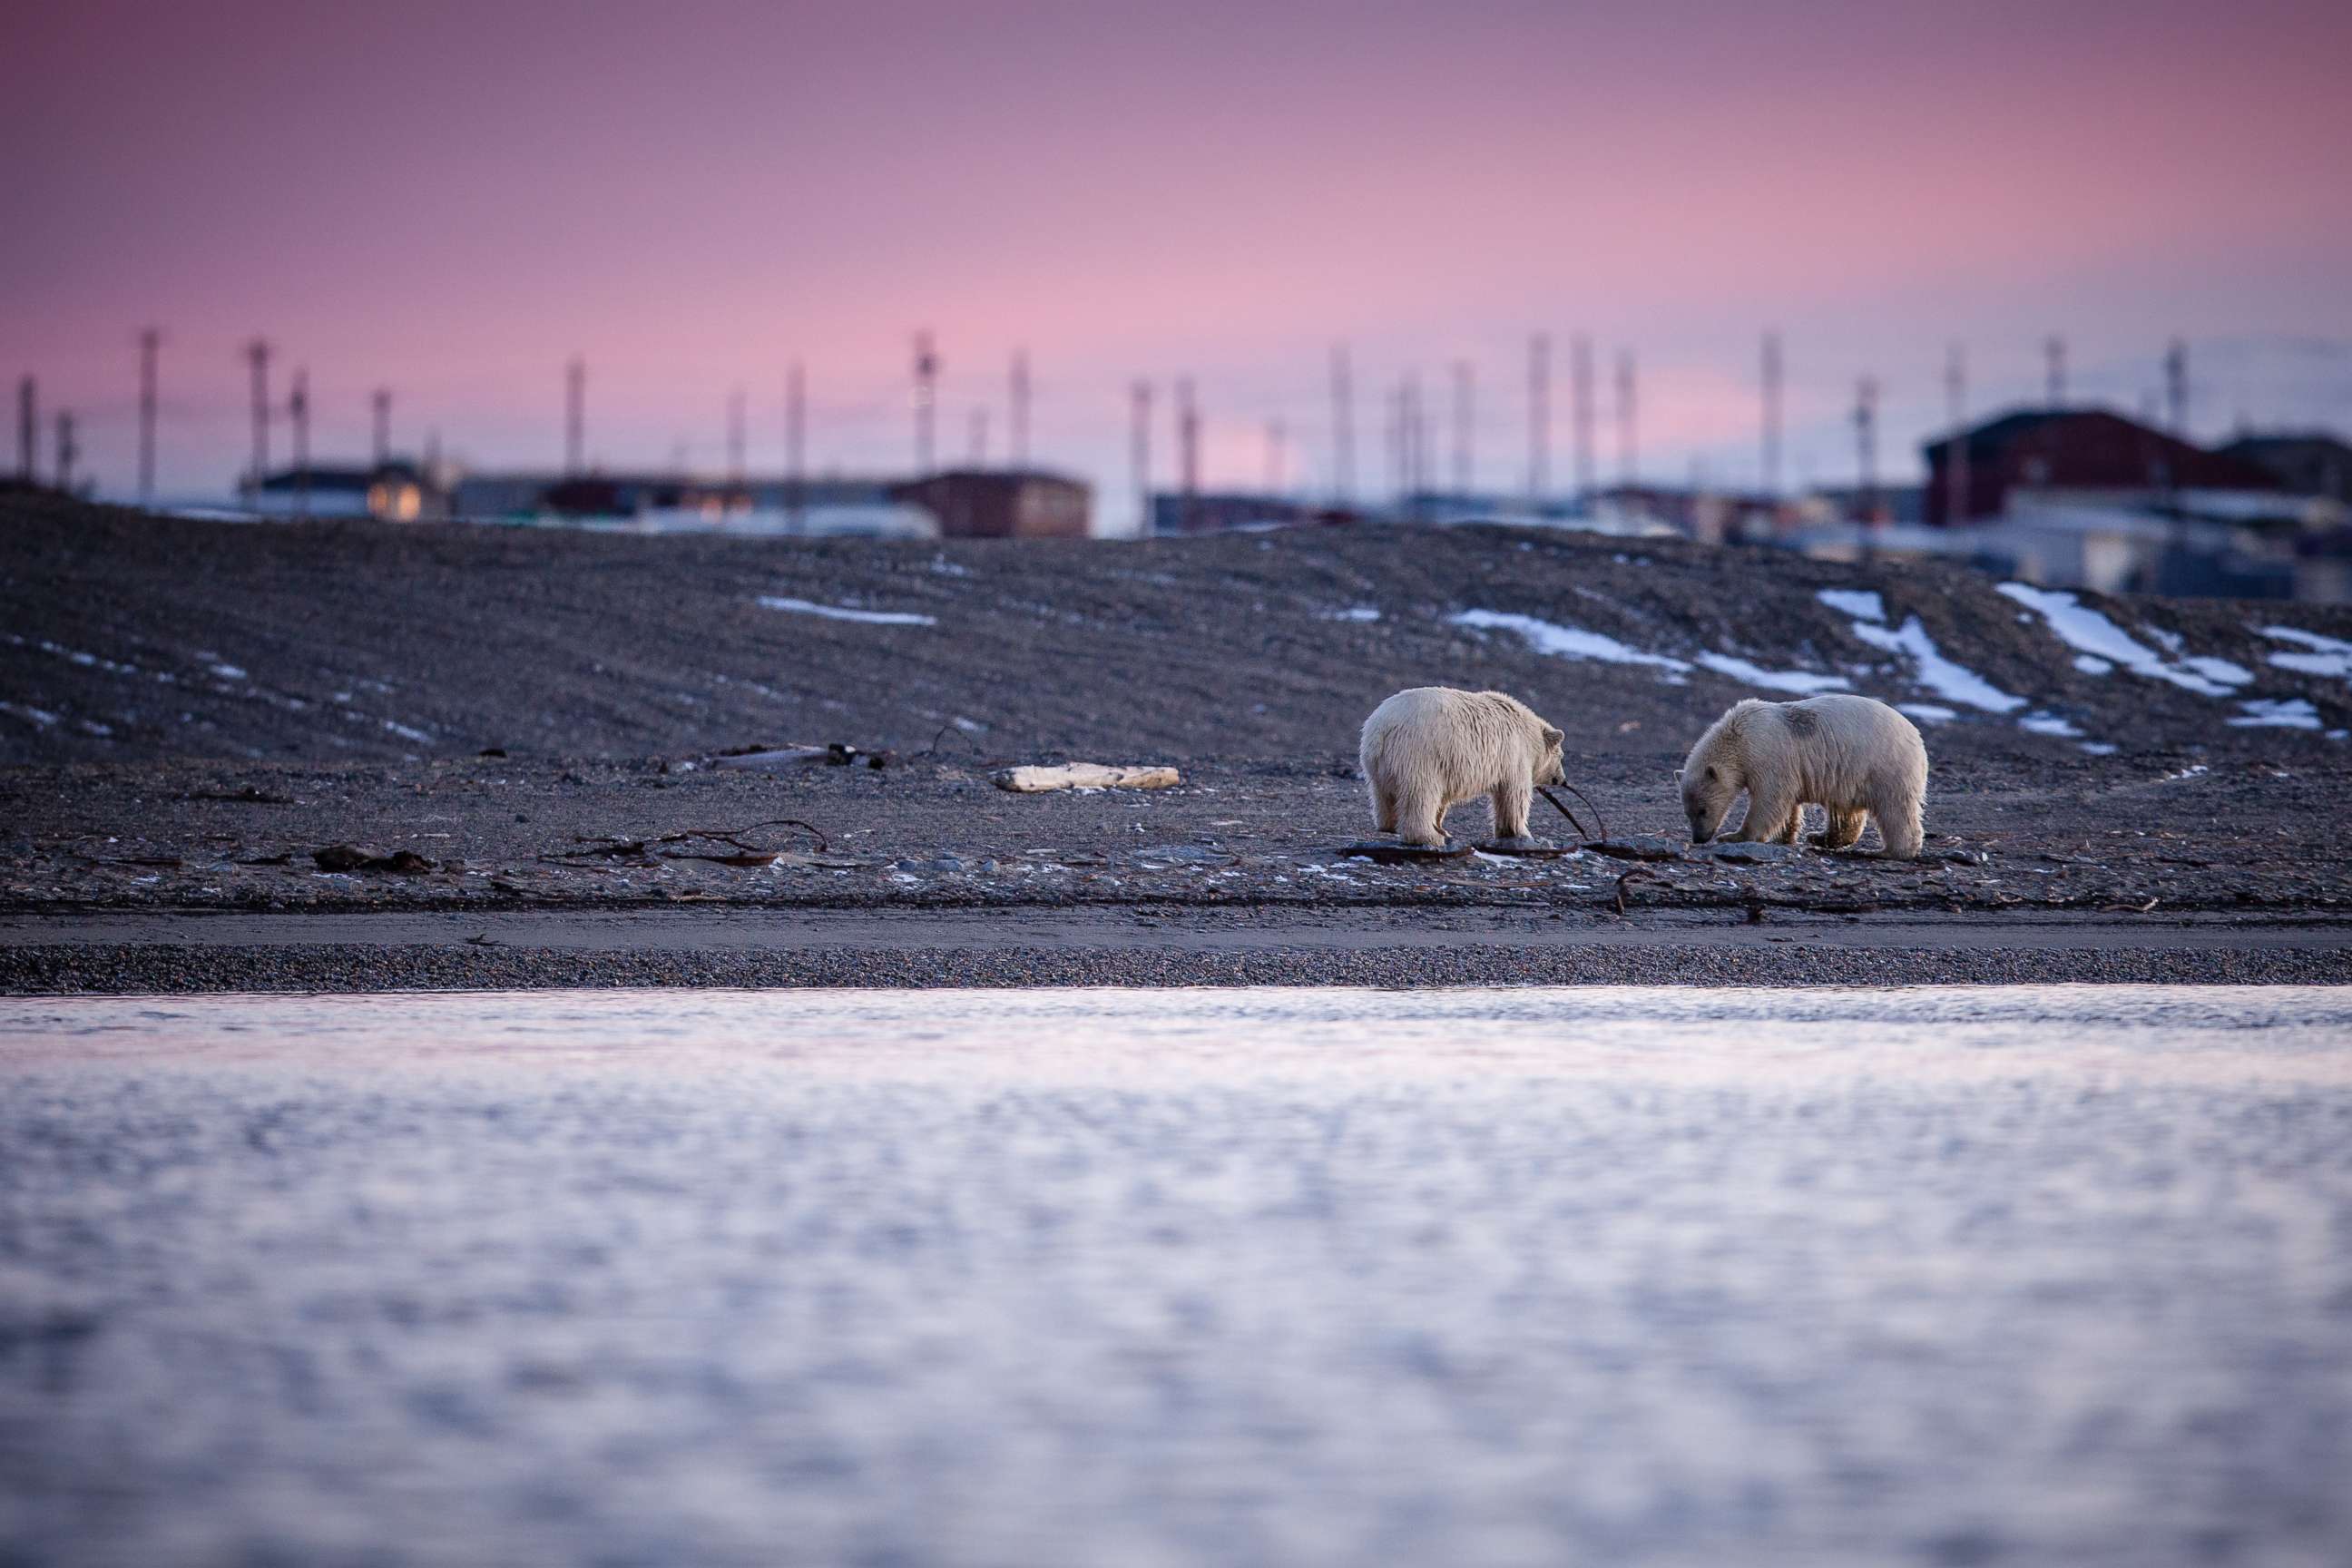 Two polar bears cubs play with rubbish along the Barter Island shore.